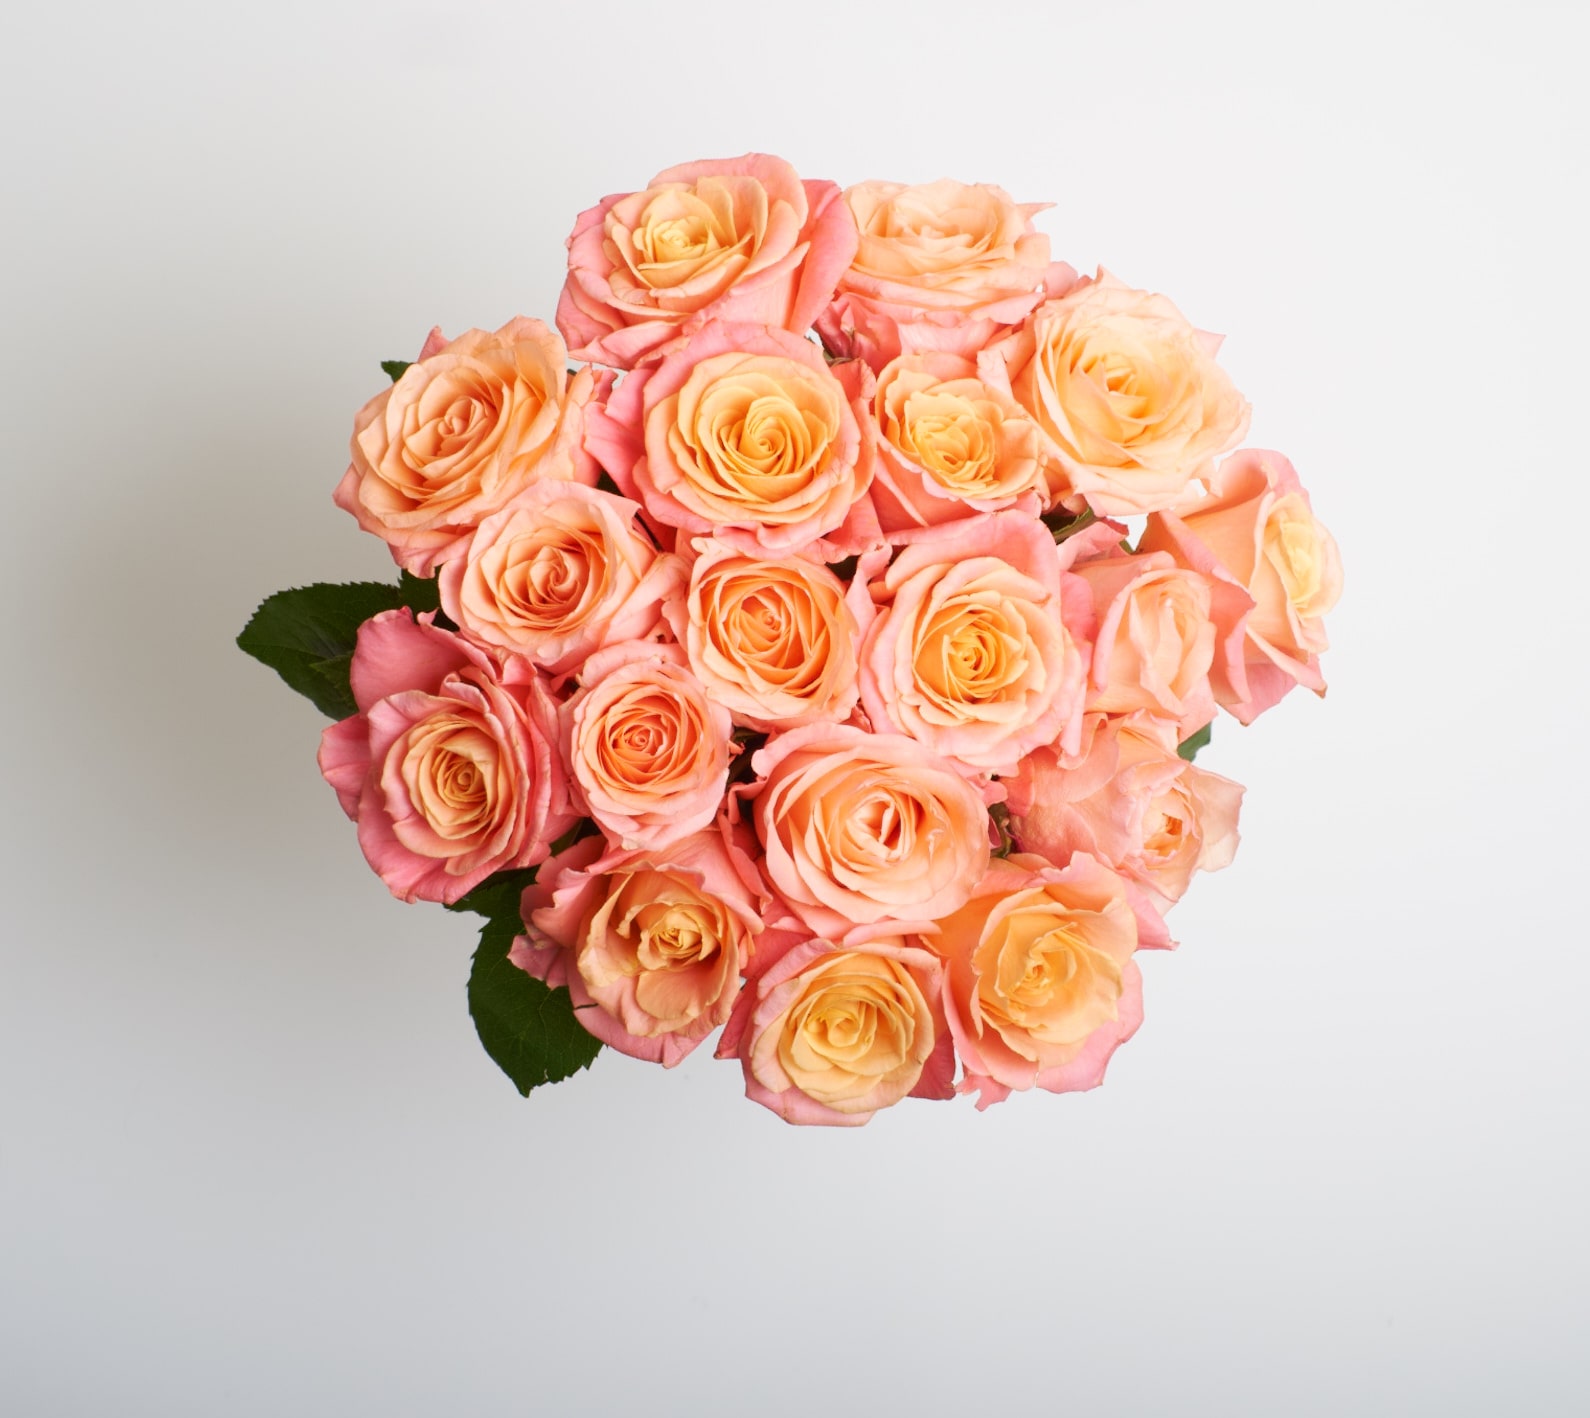 Hollister Florist - Flower Delivery by Barone's Westlakes Balloons and Gifts